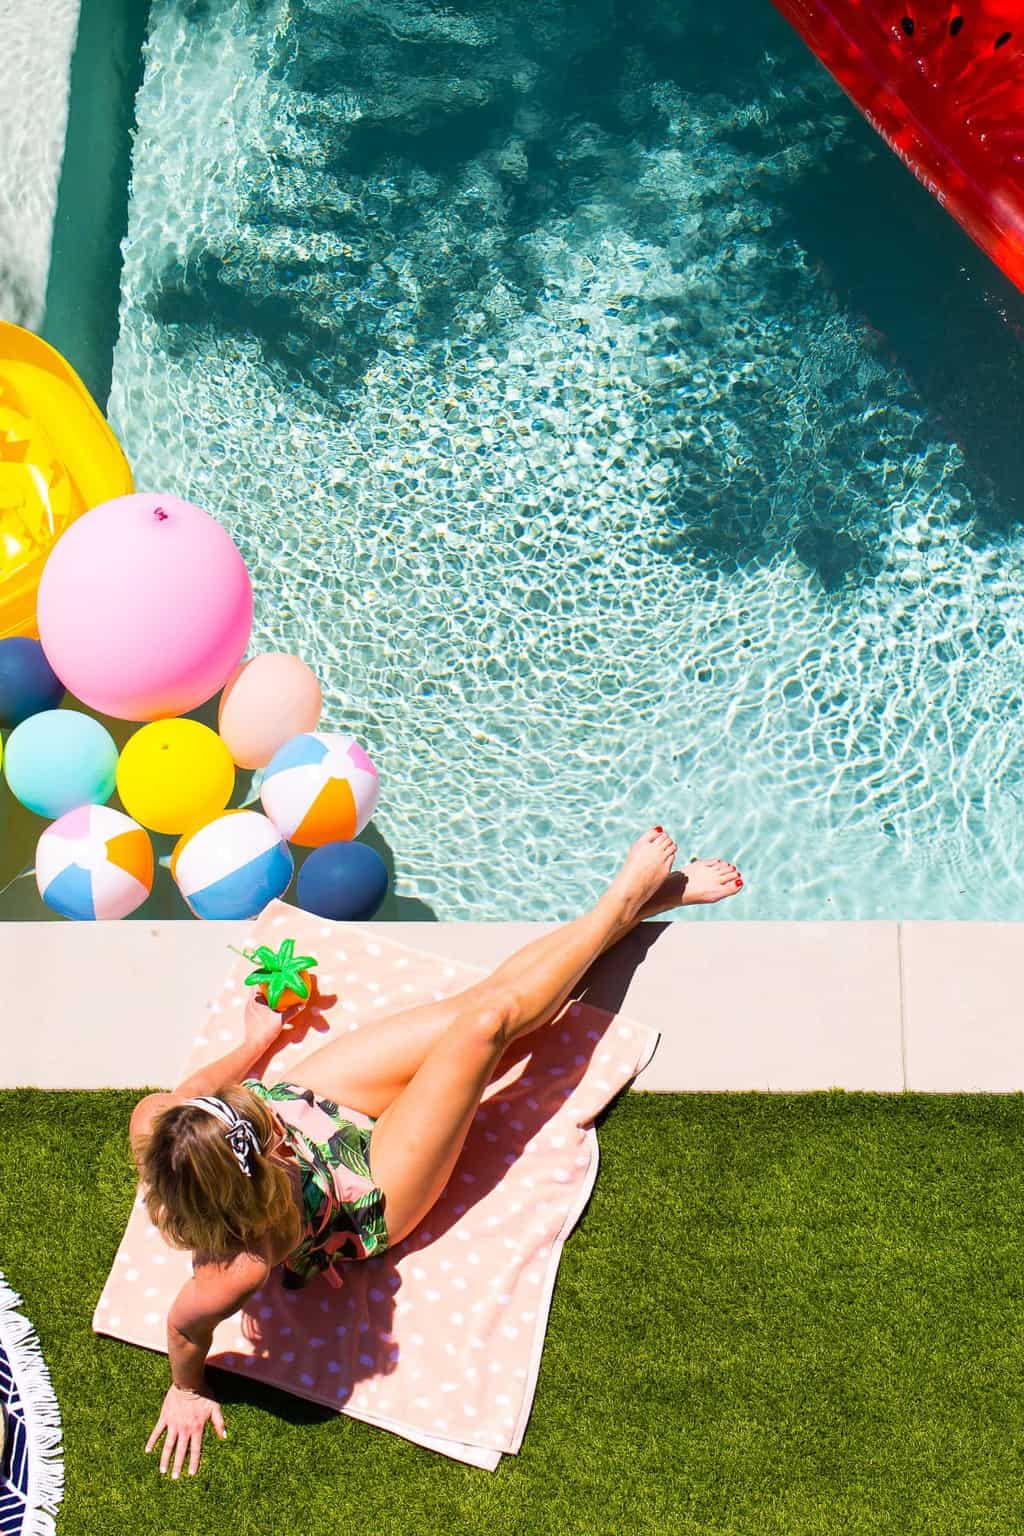 Lounging poolside cool with the perfect Spotify Summer playlist! Sugar & Cloth